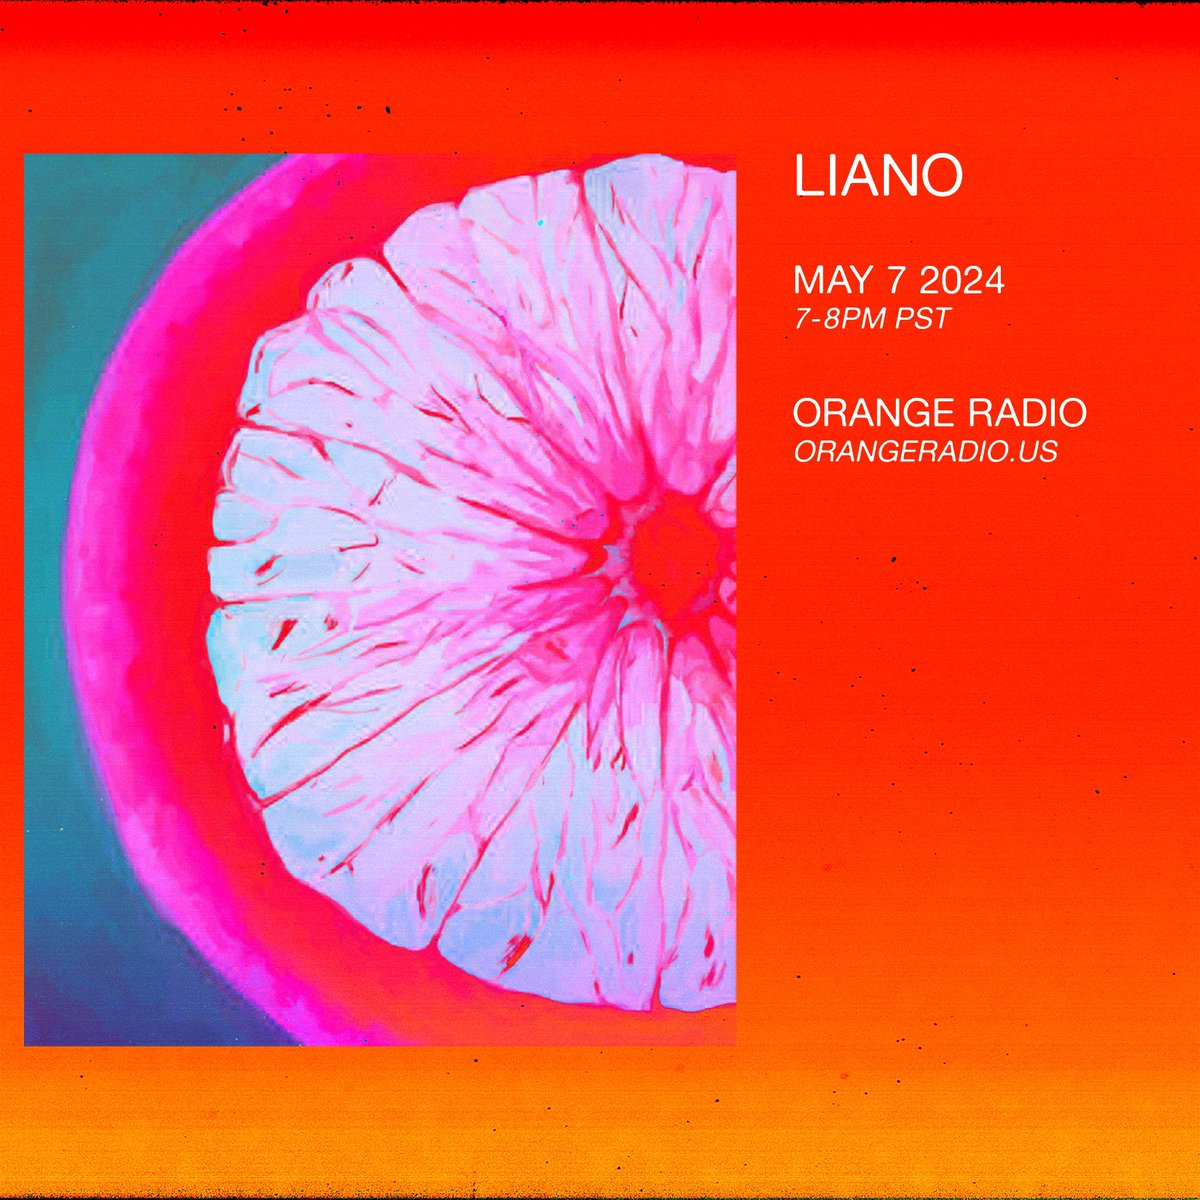 Big chunin on @_orangeradio tonight 7-8 . Find out 🫵🏽. Flyer by: @AviLoud